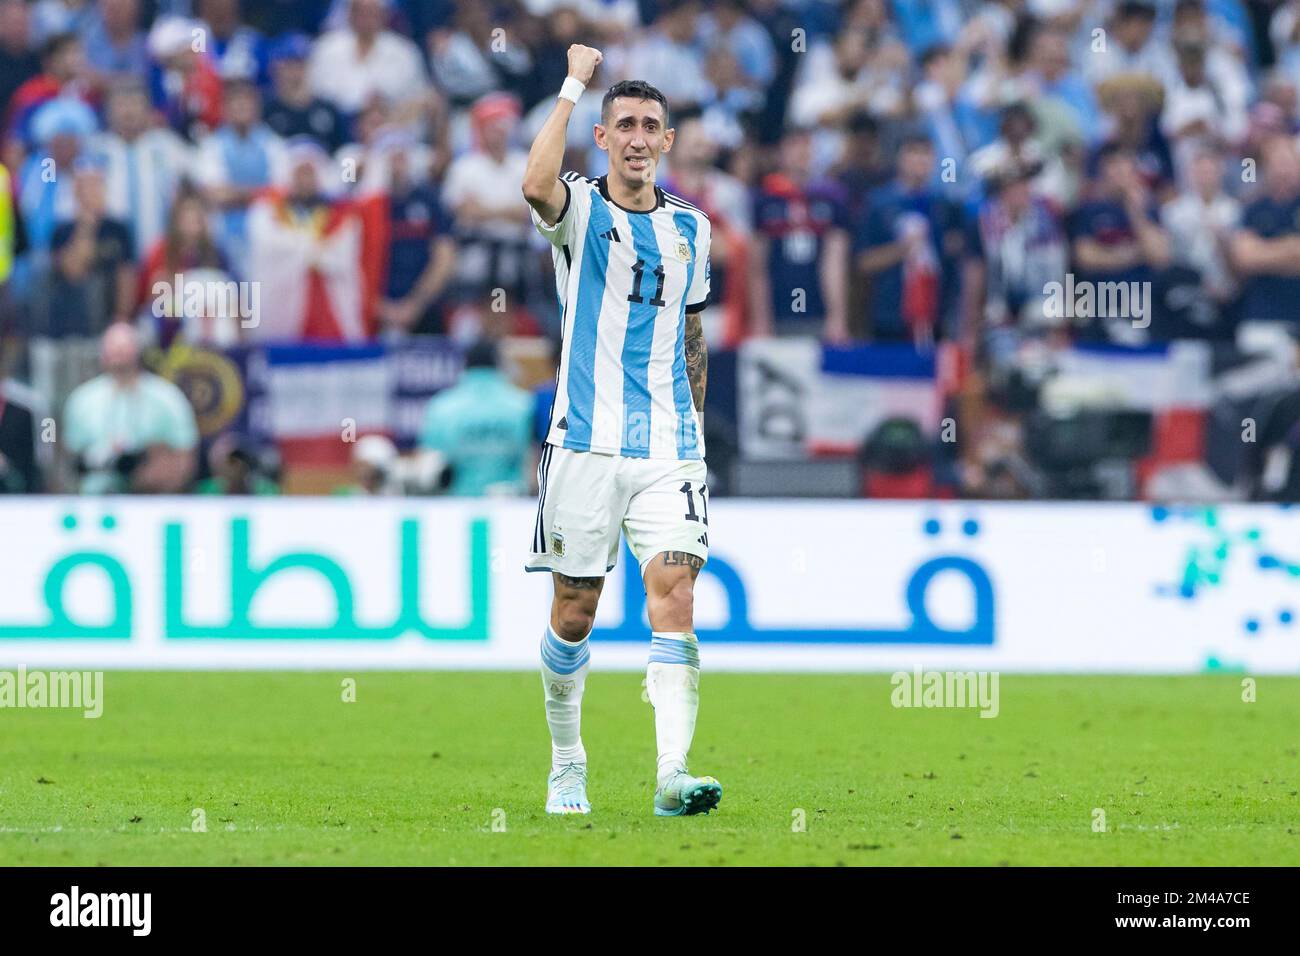 Lusail, Qatar. 18th Dec, 2022. Soccer: World Cup, Argentina - France, final round, final, Lusail Stadium, Argentina's Ángel di Maria cheers after his goal for 2:0. Credit: Tom Weller/dpa/Alamy Live News Stock Photo